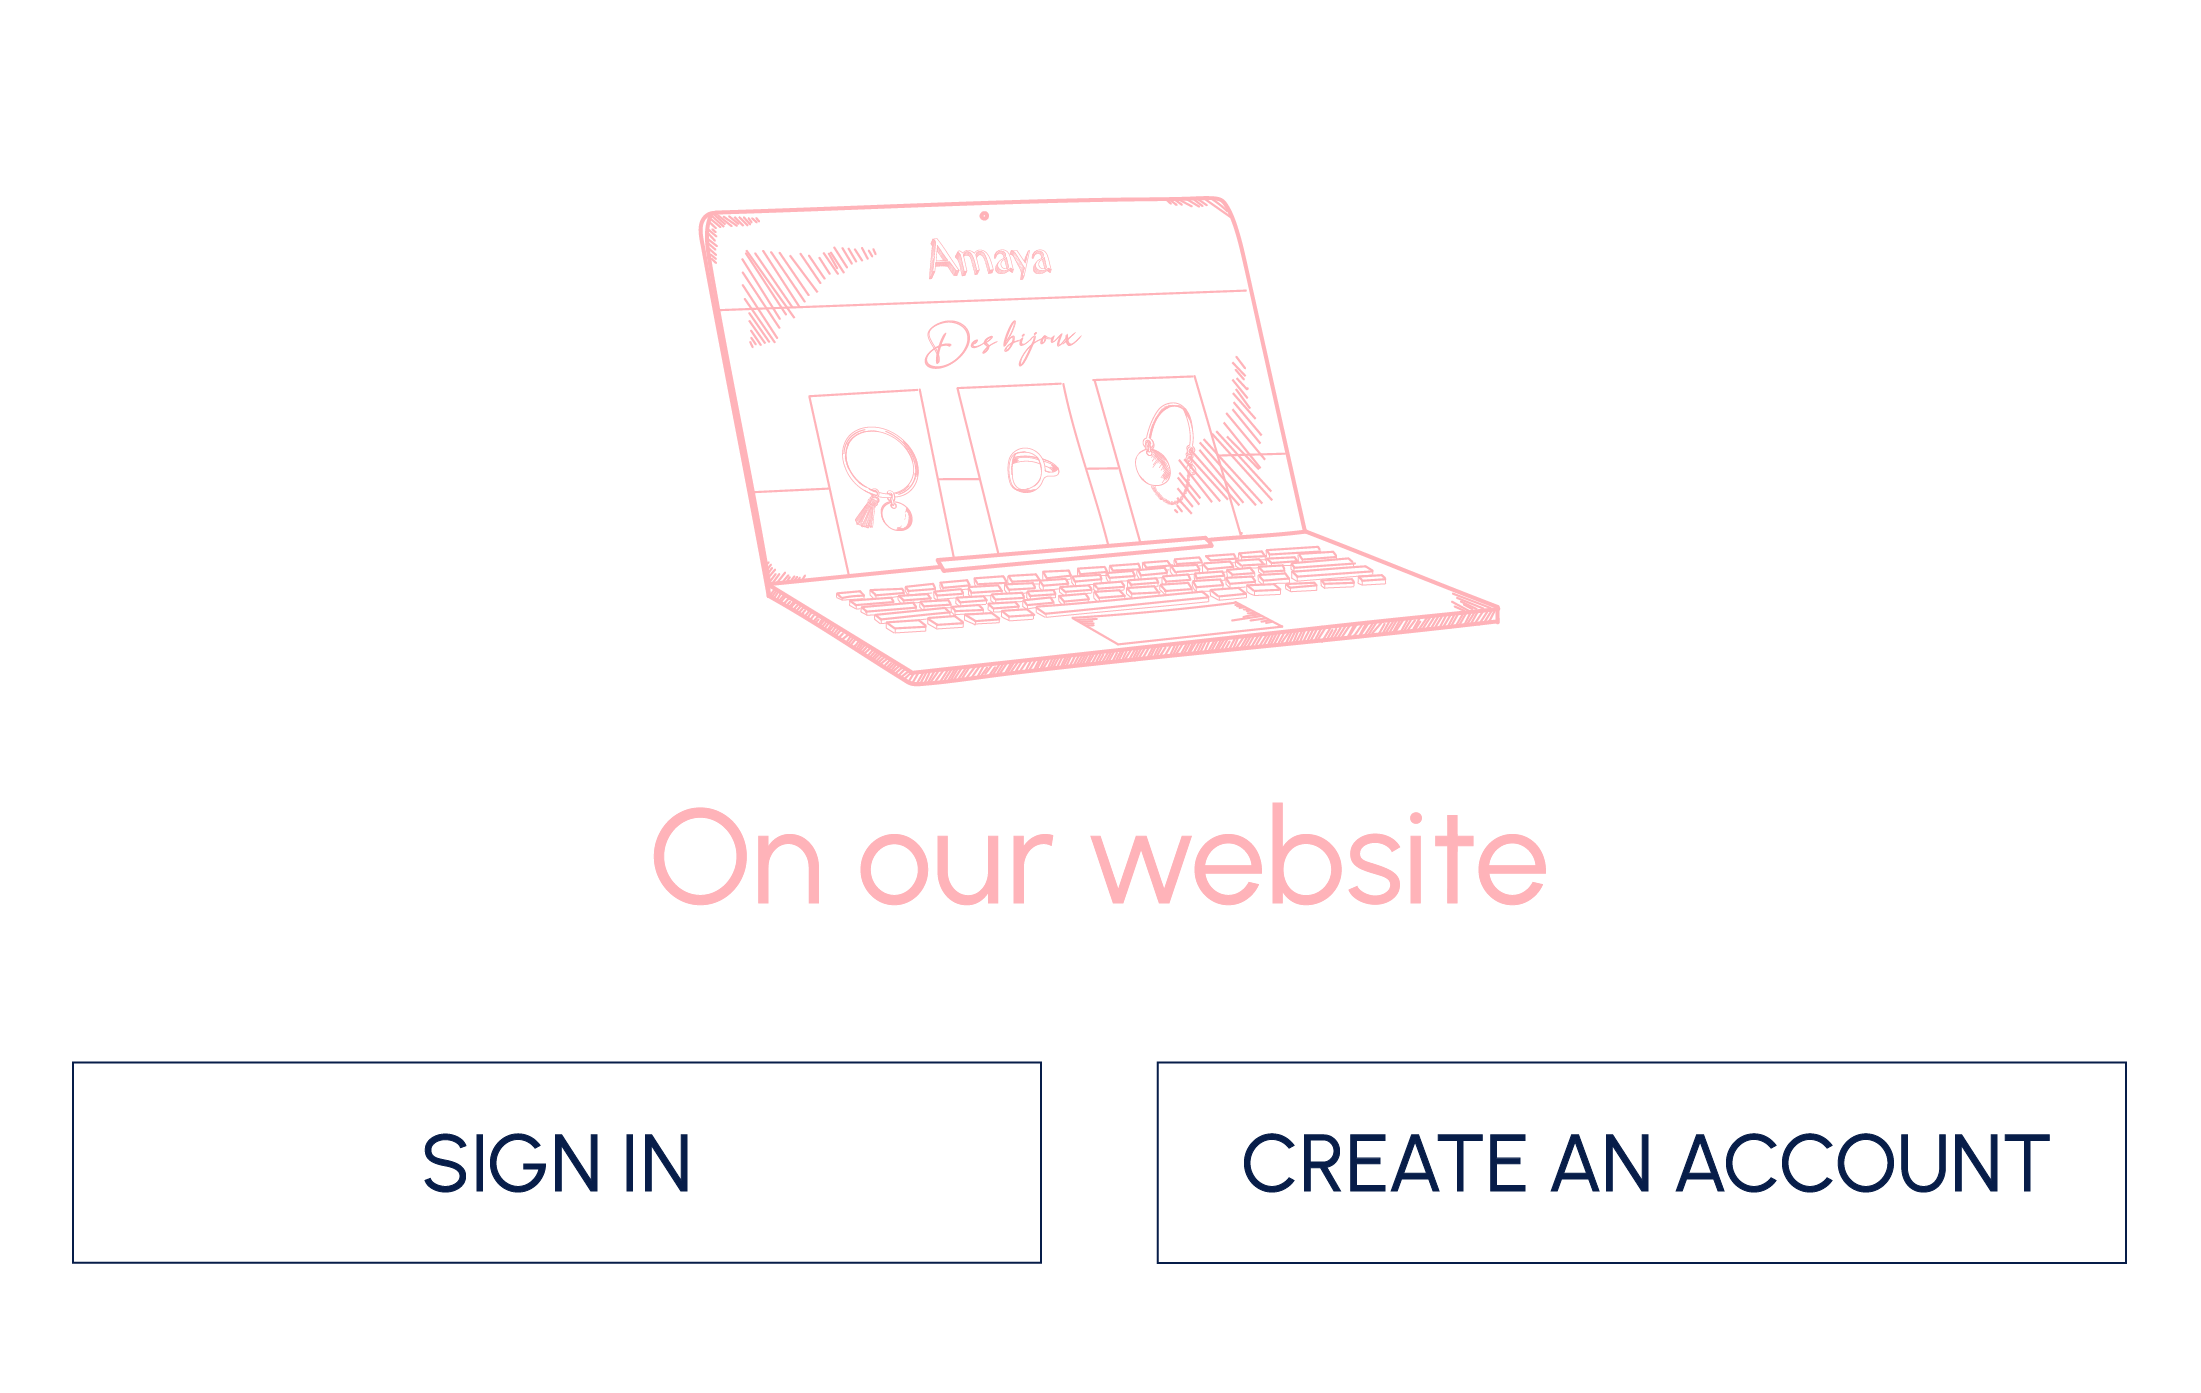 Create an account on our website